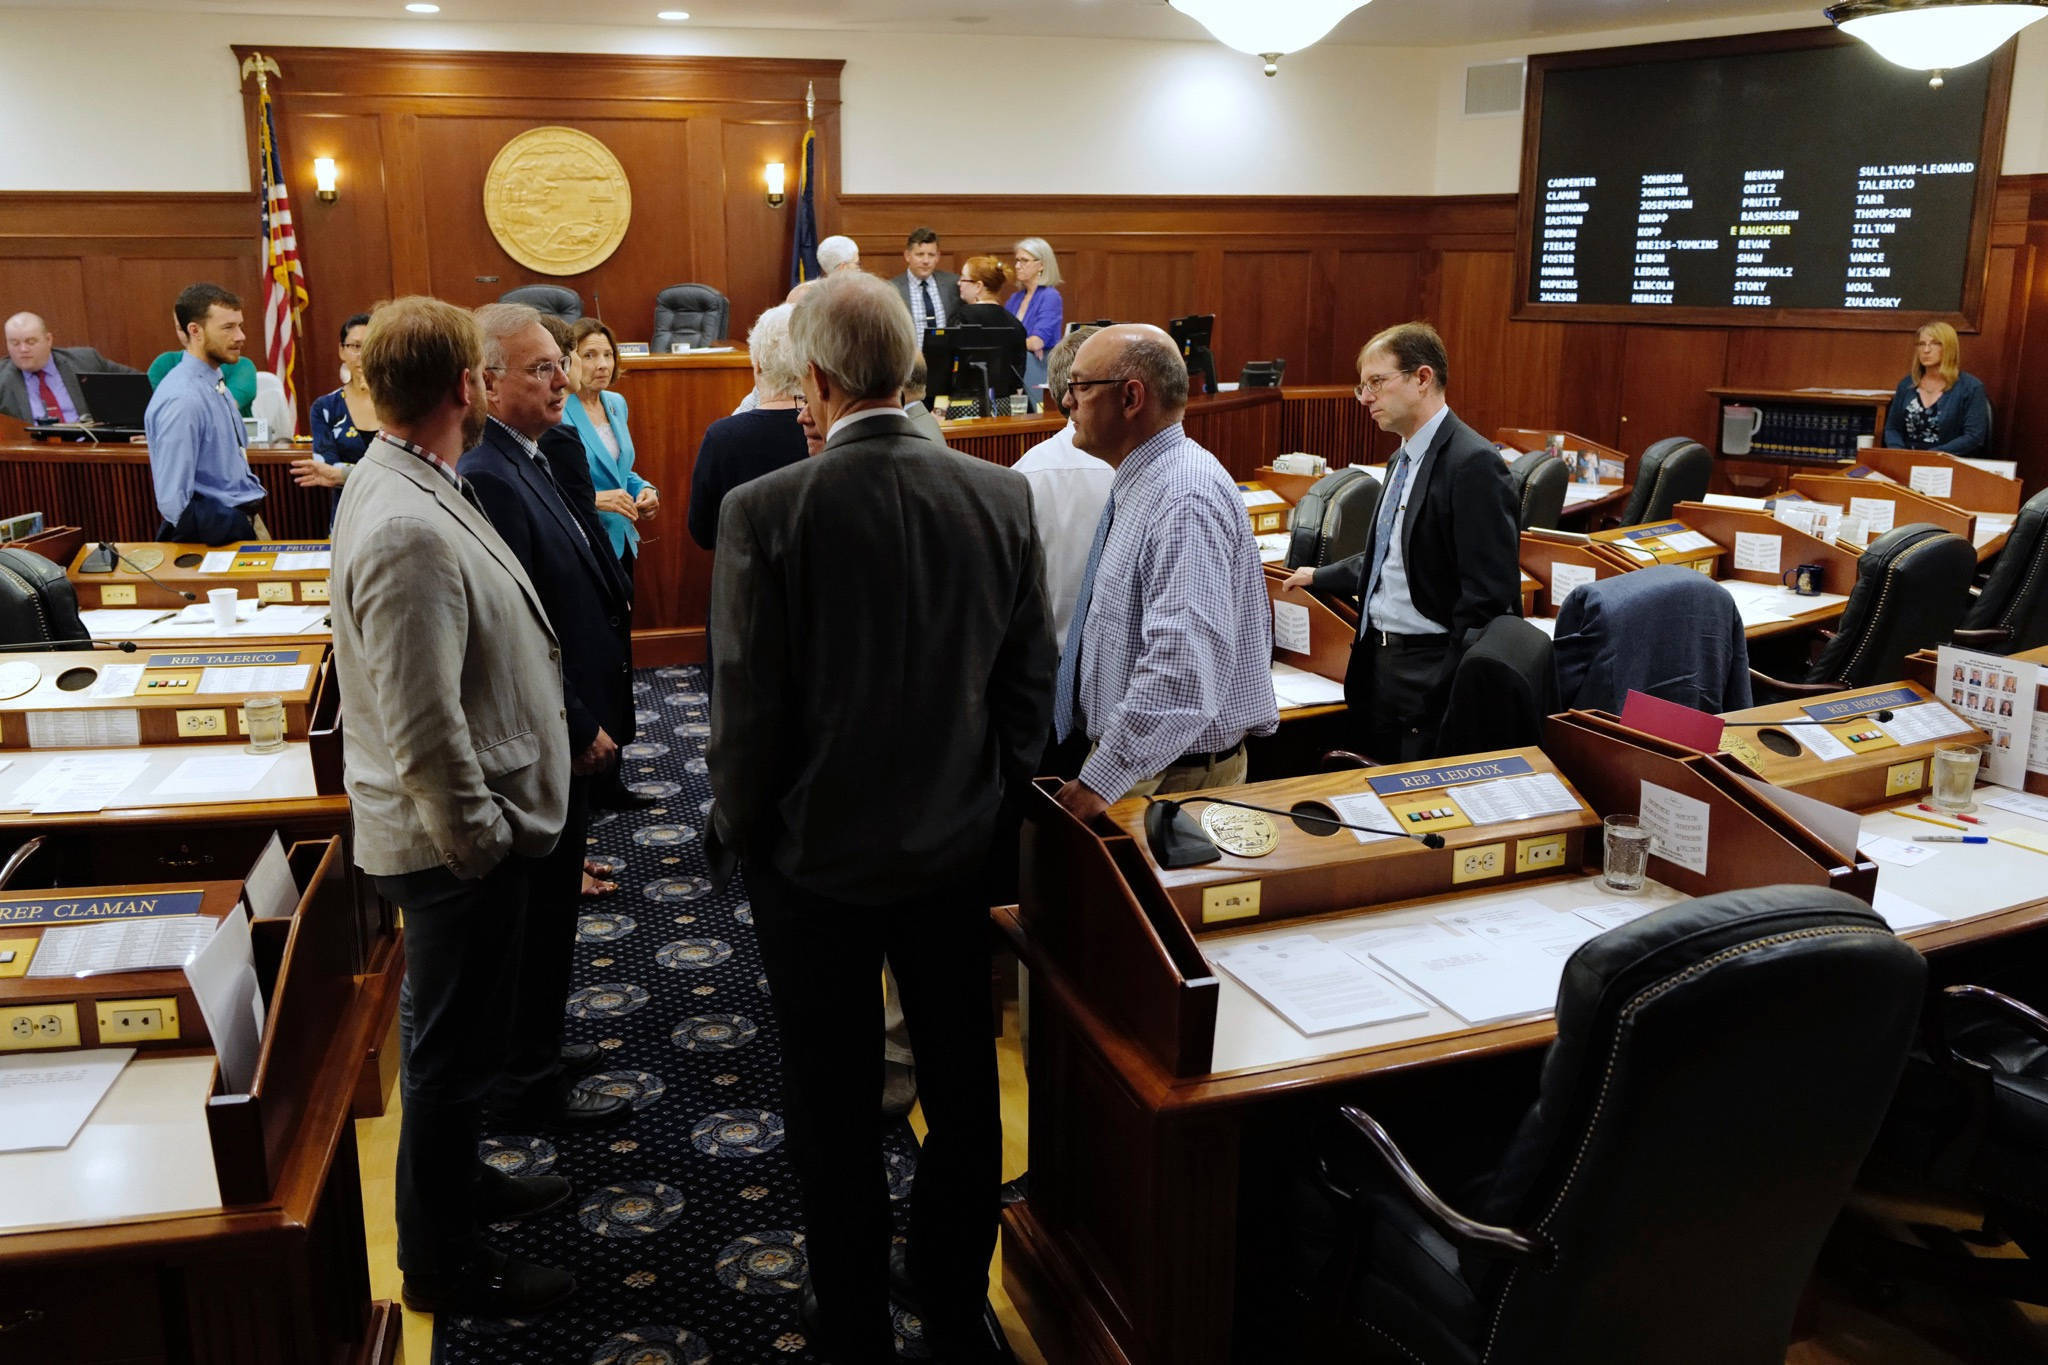 Lawmakers talk among themselves during a break of a joint session of the Alaska Legislature Thursday, July 11, 2019, in Juneau, Alaska. Lawmakers are meeting for a second day to consider overriding Gov. Mike Dunleavy’s budget vetoes, but still don’t have the needed 45 votes as about a third of lawmakers continue to meet in Wasilla instead of Juneau. (Michael Penn | Juneau Empire)